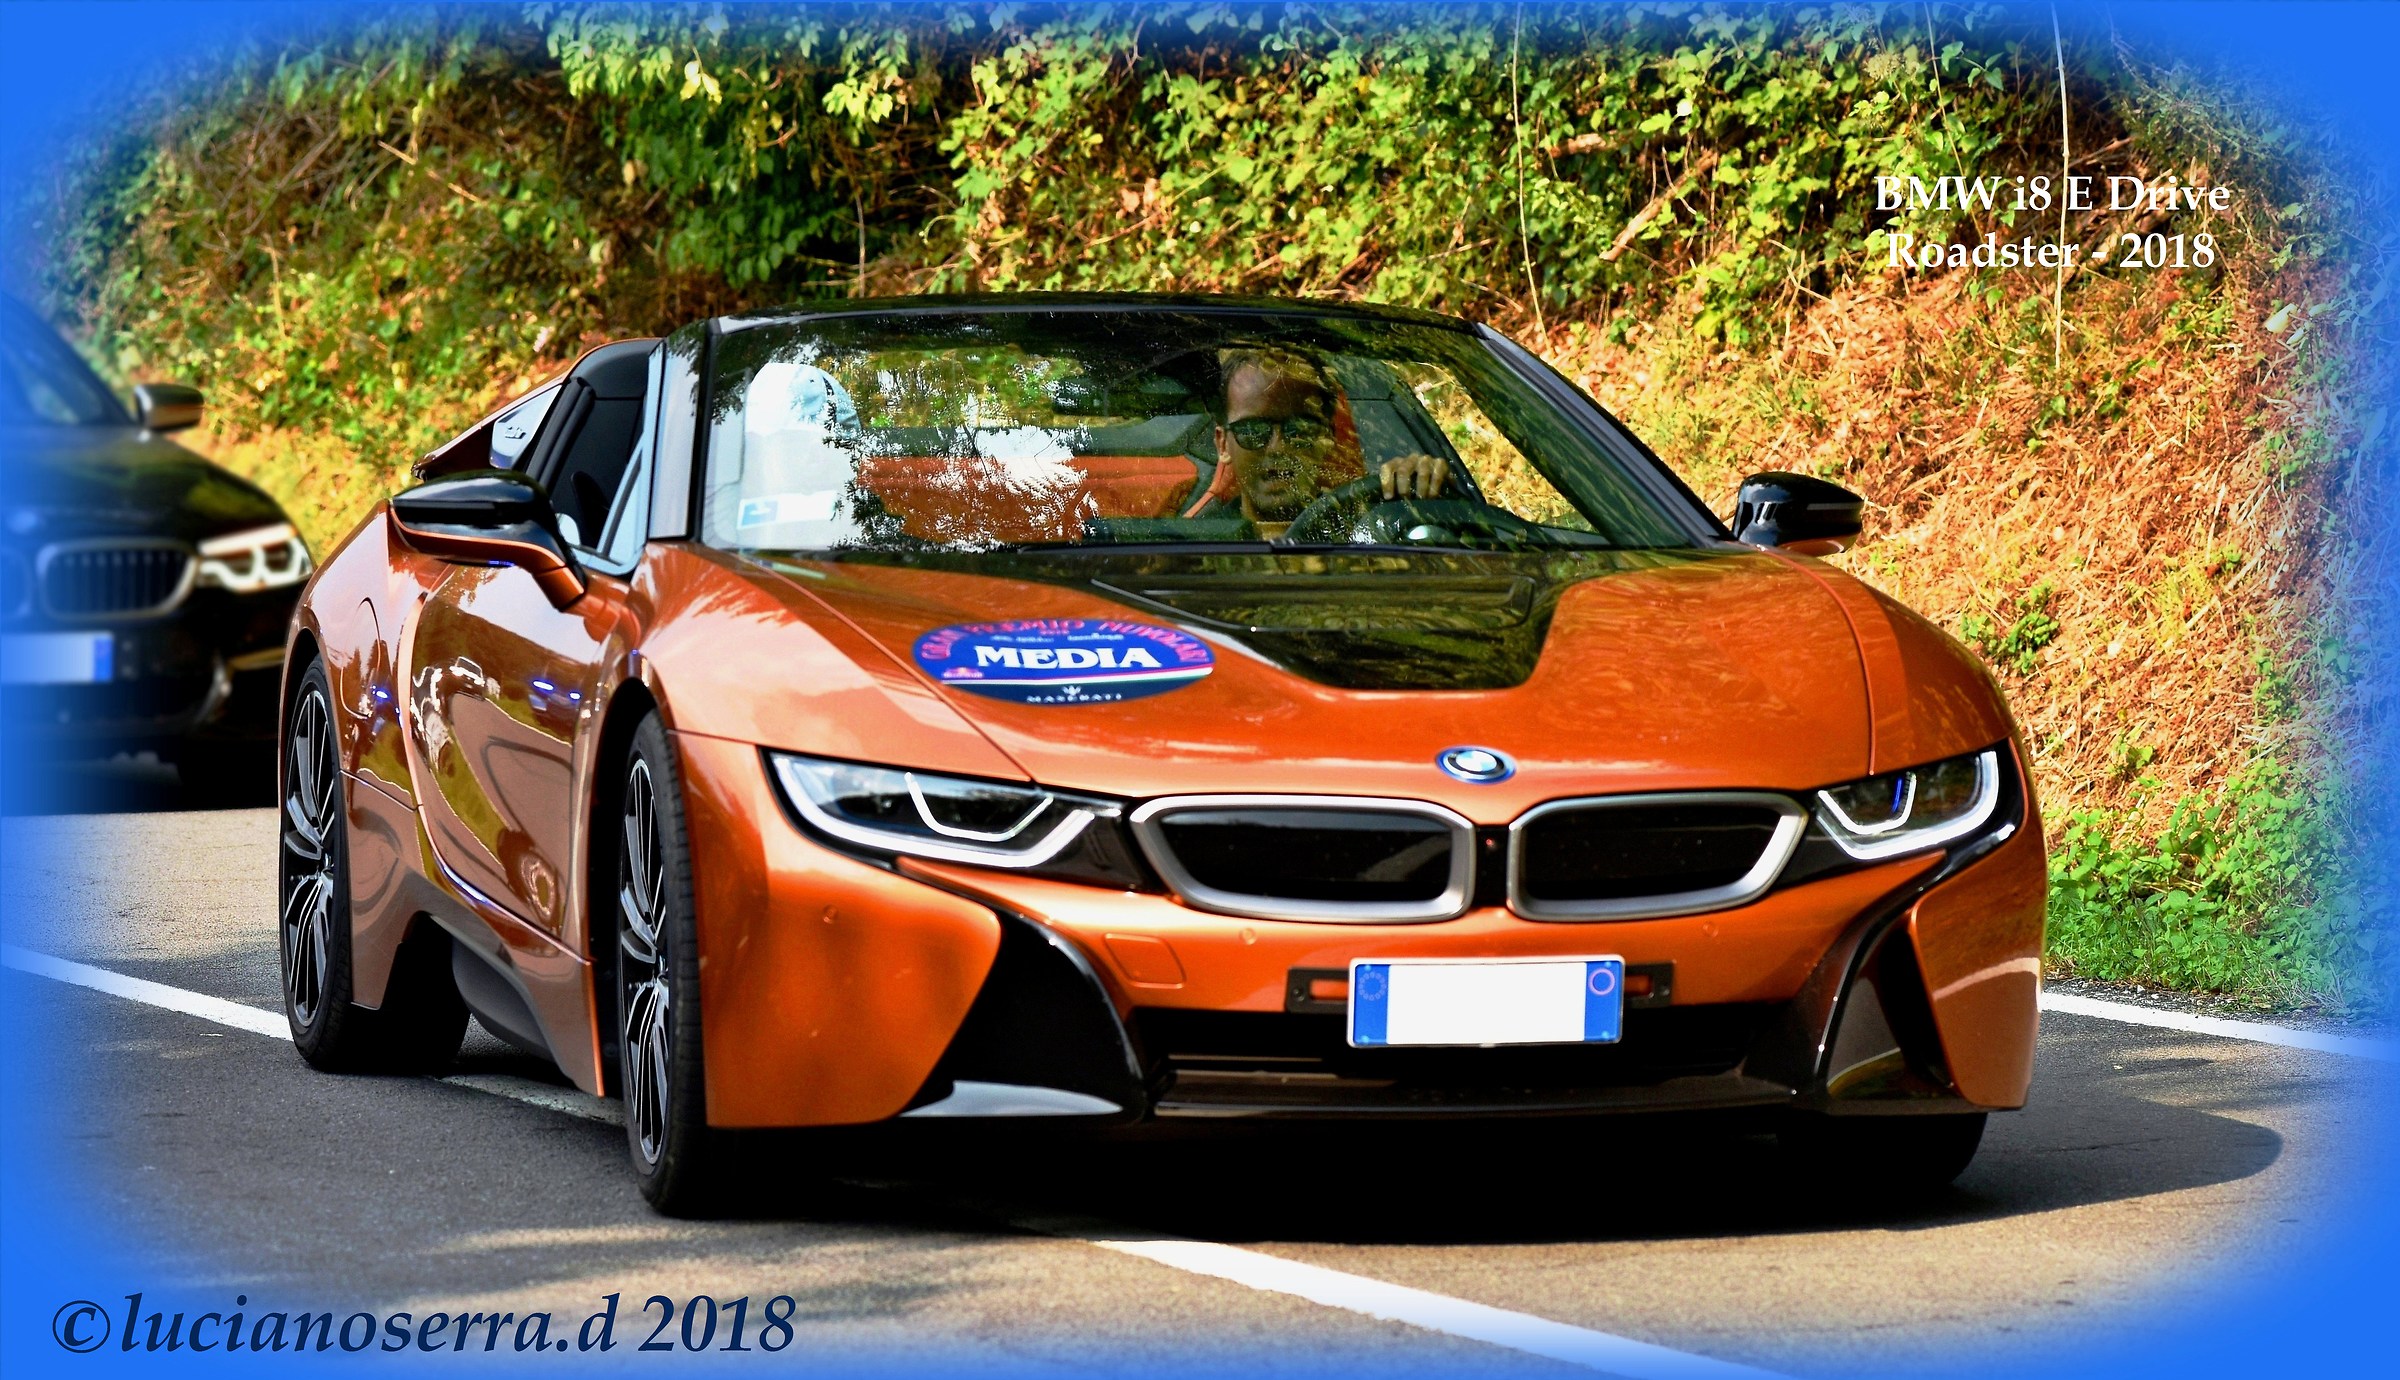 BMW i8 and Drive Roadster-2018...